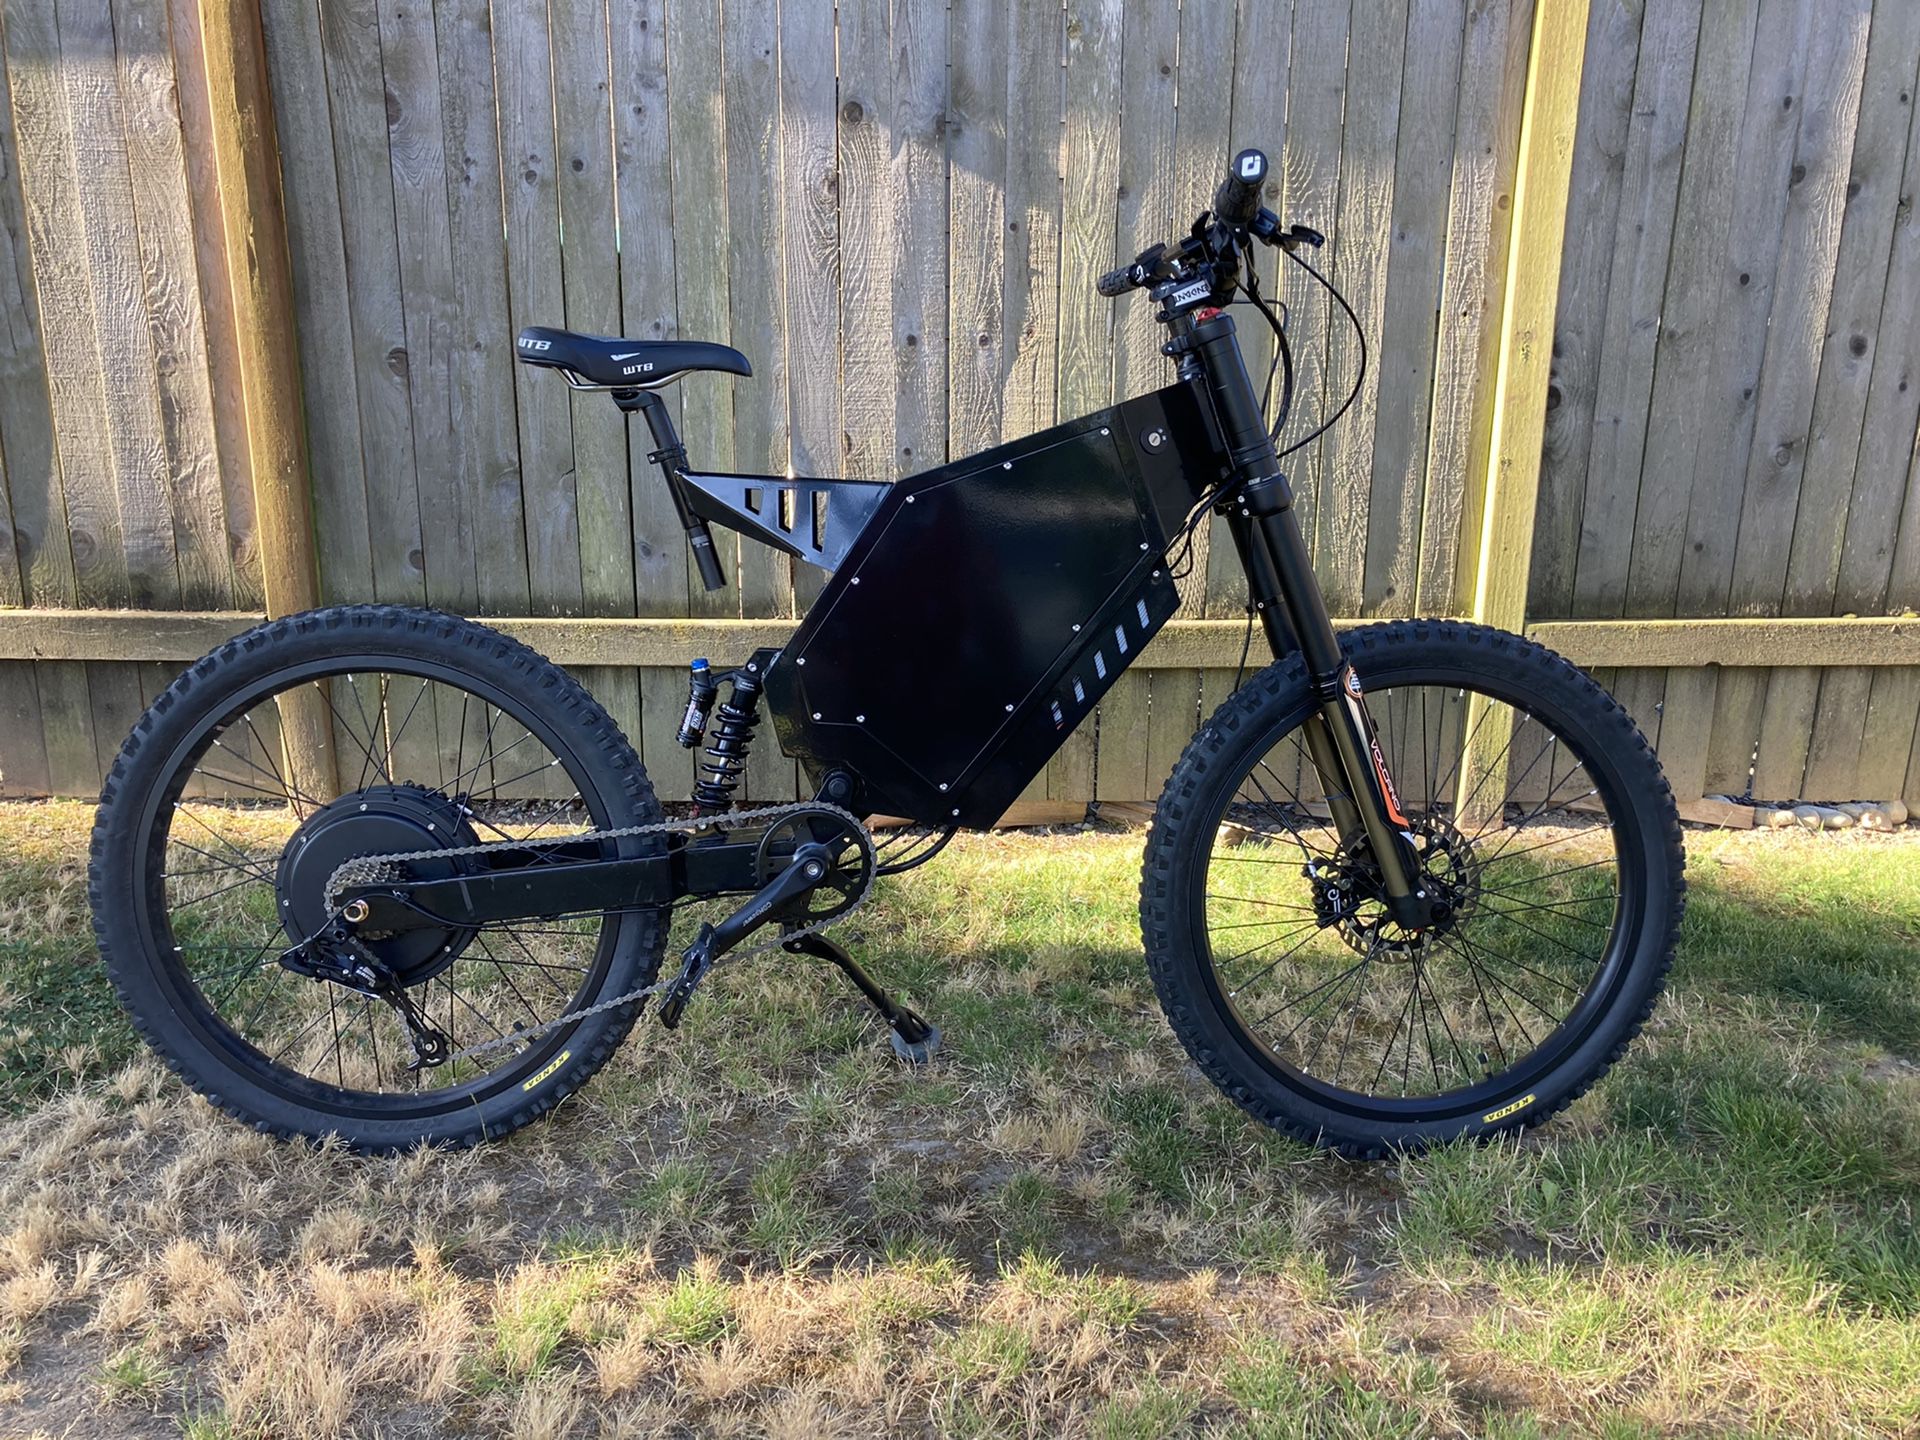 Electric Motorcycle / Bicycle 72v 5000w (Stealth Bomber)